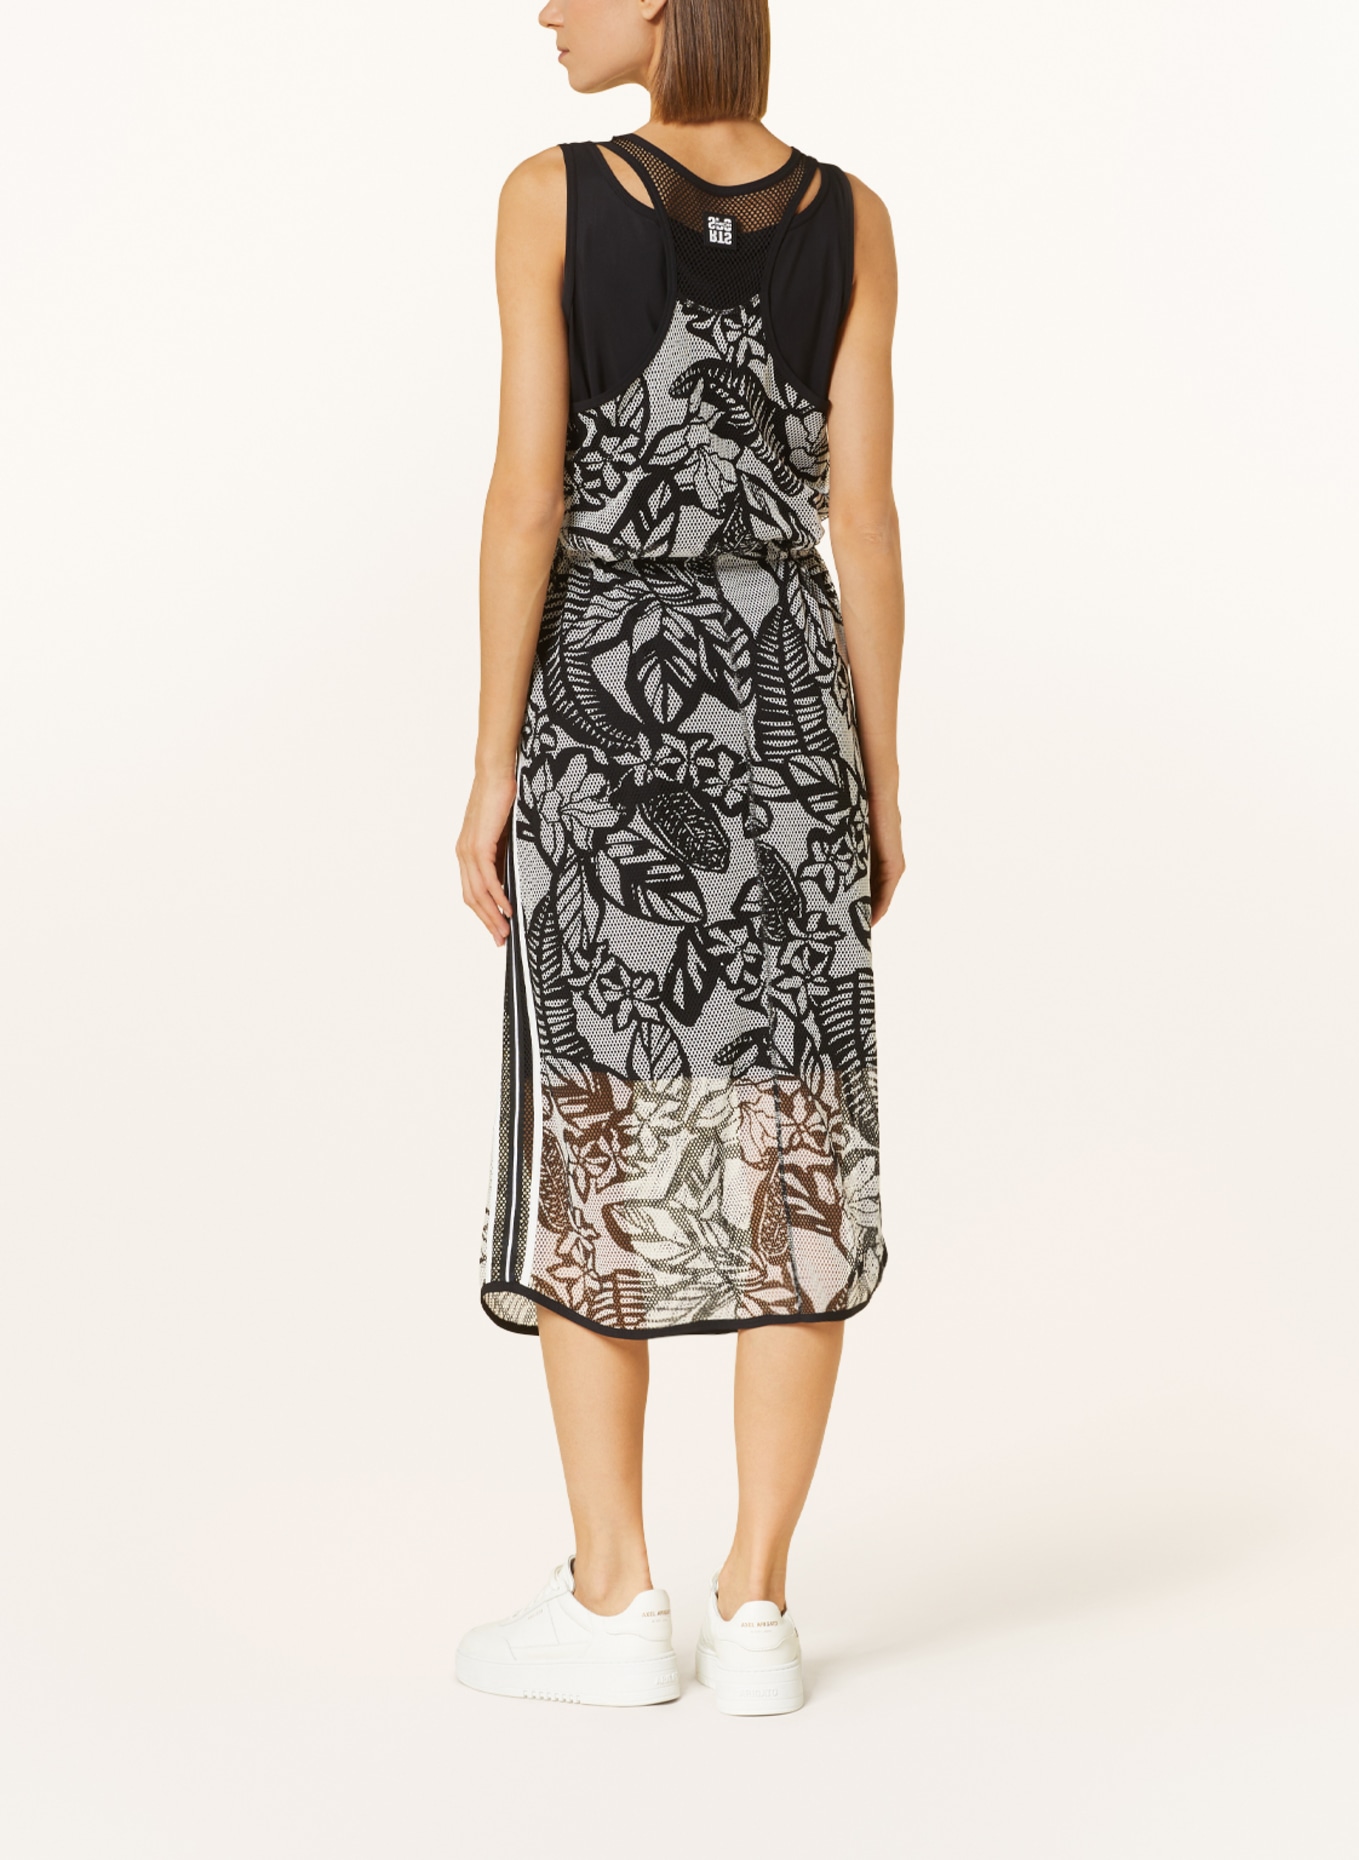 MARC CAIN Mesh dress, Color: 910 black and white (Image 3)